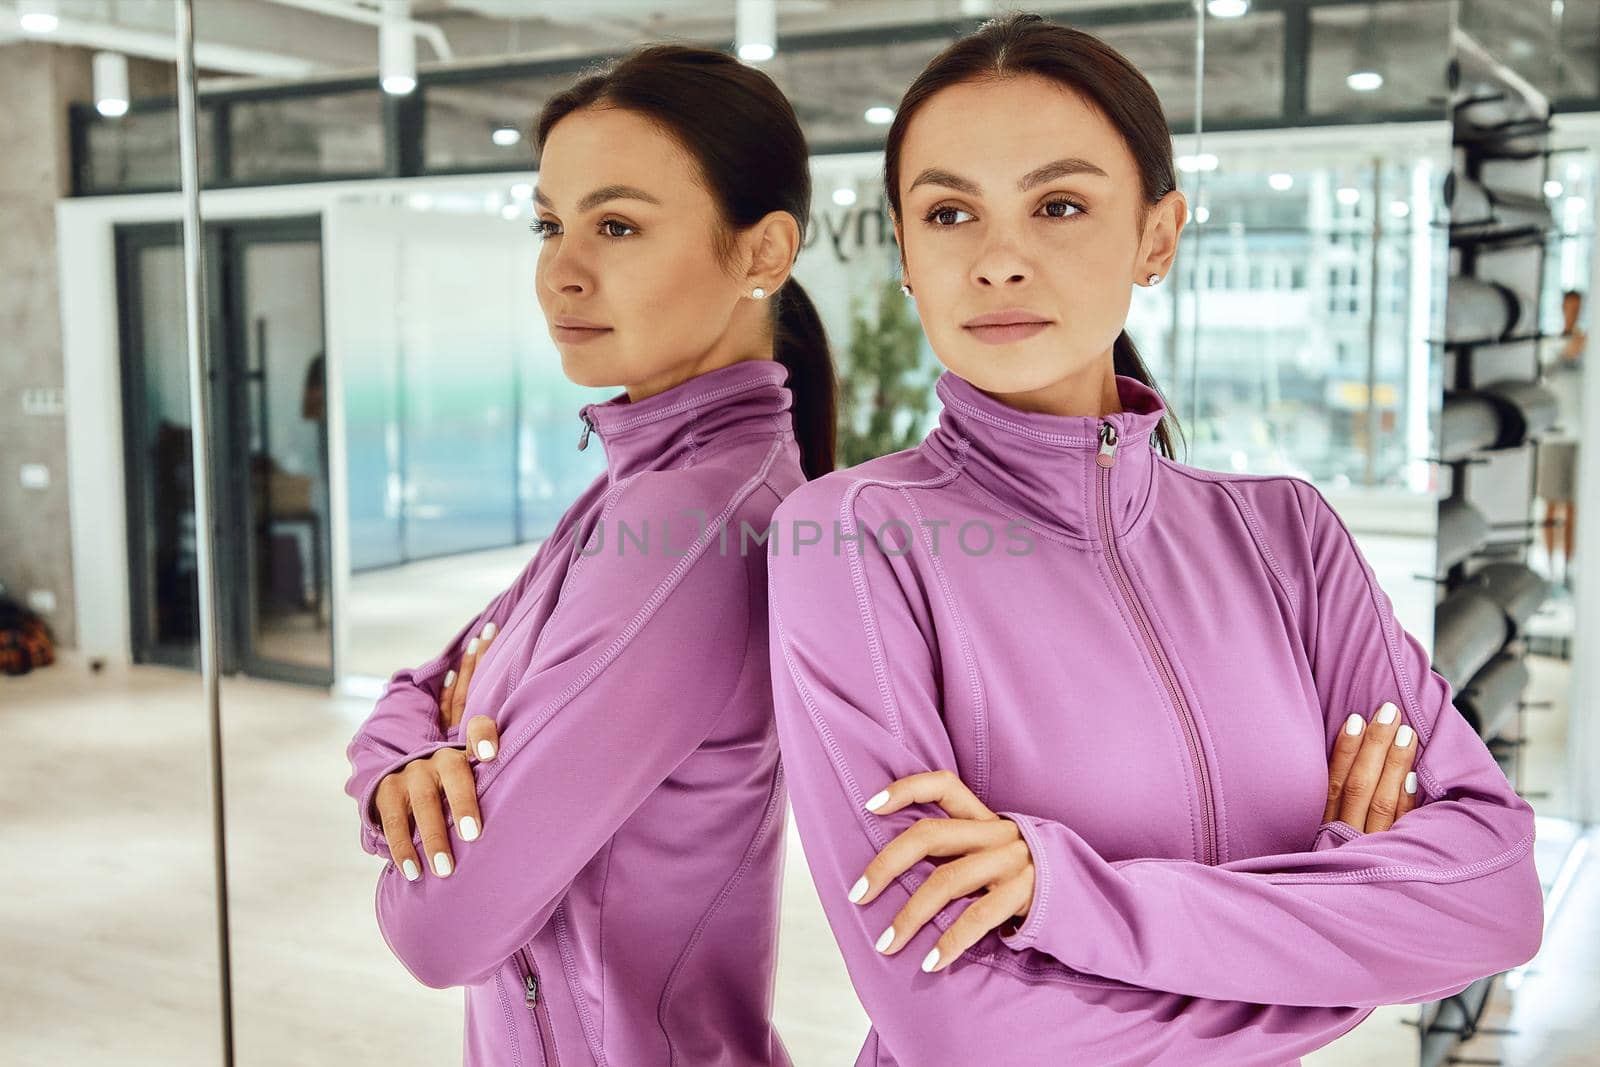 Fitness instructor. Portrait of a young beautiful woman in sportswear standing in studio or gym against mirror wall and looking away. Sport, wellness and healthy lifestyle